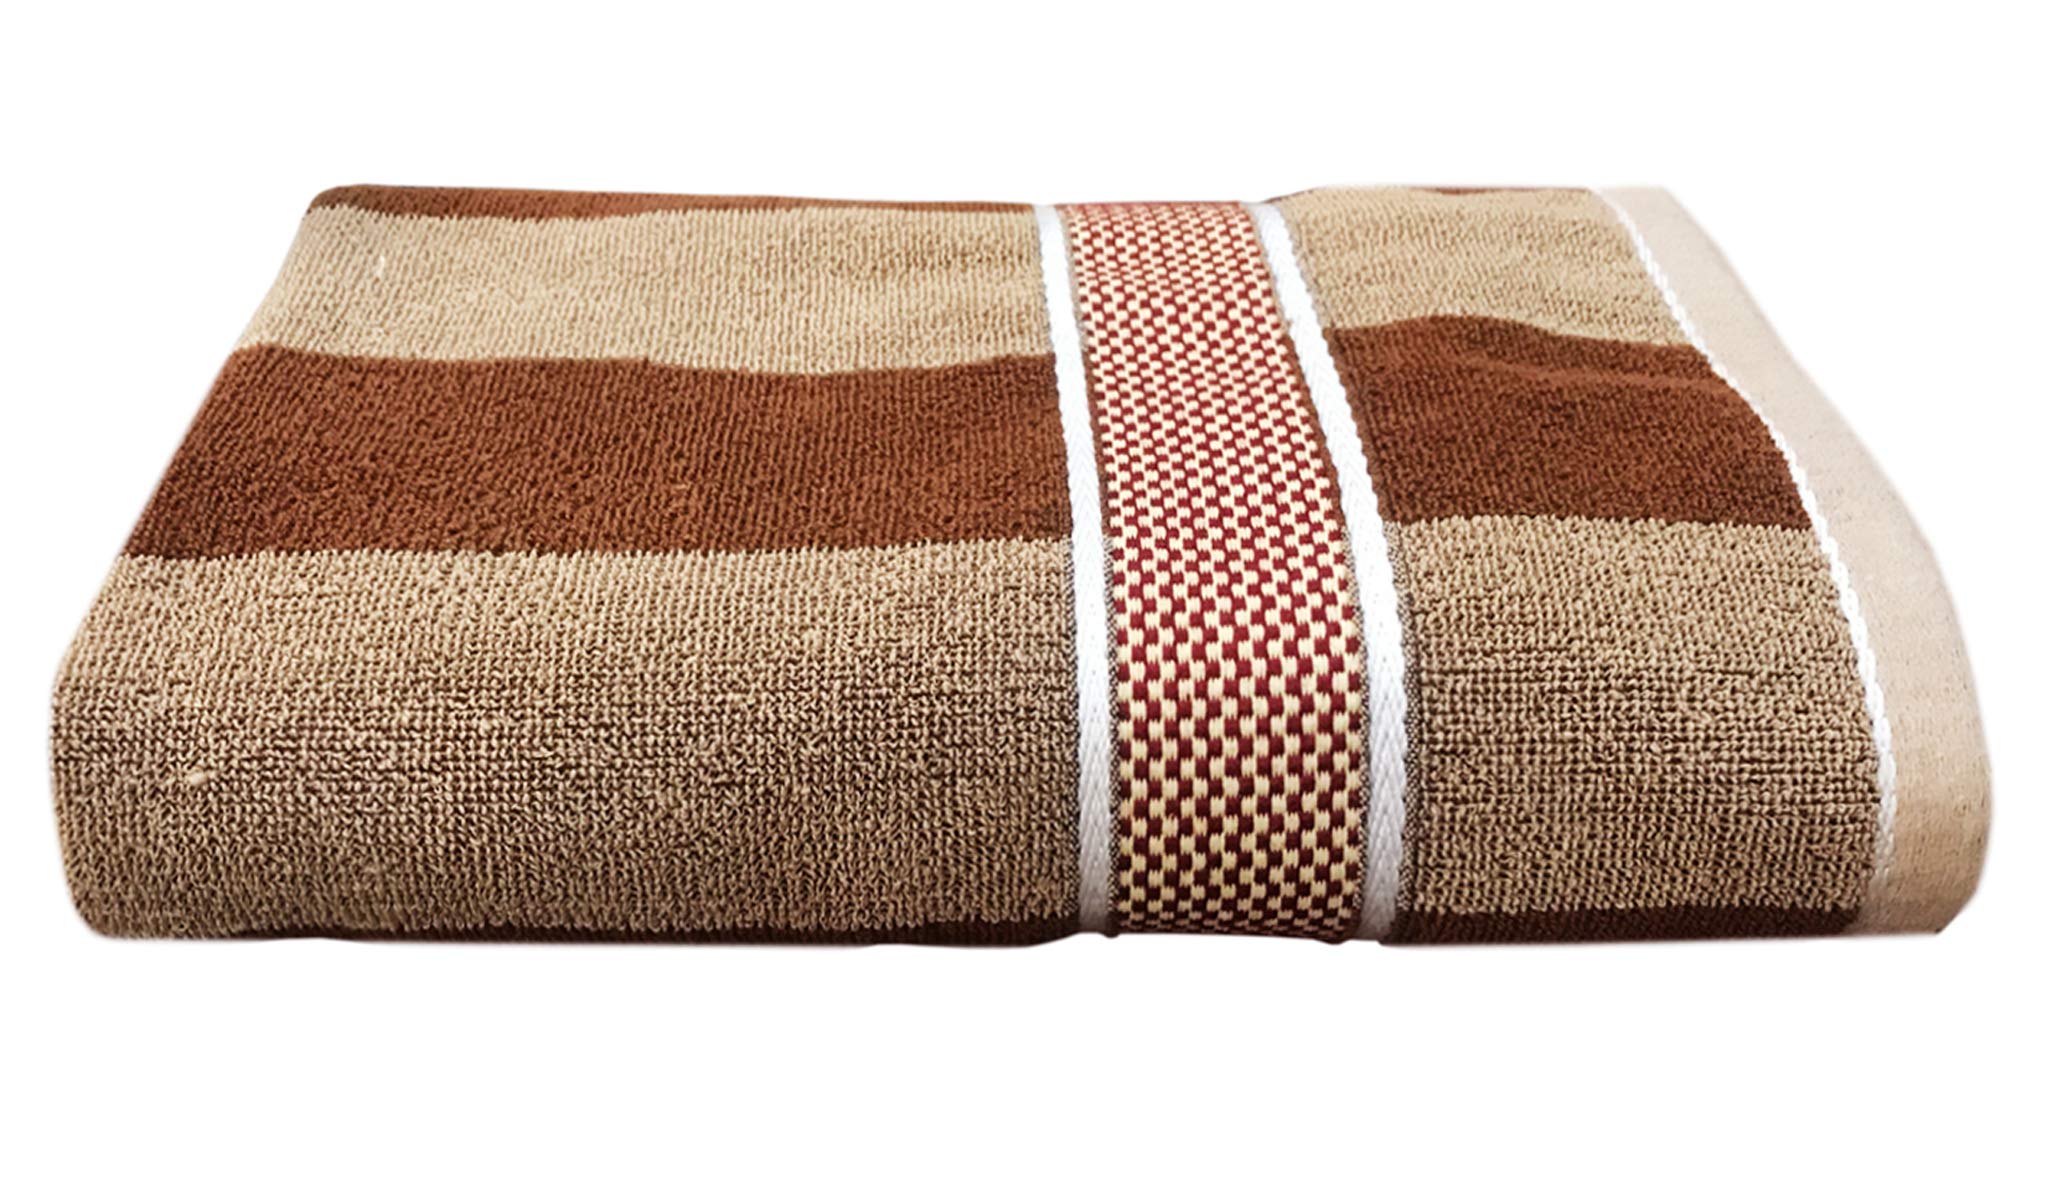 Kuber Industries Cotton 4 Pieces Bath Towel Super Soft, Fluffy, and Absorbent, Perfect for Daily Use 100% Cotton Towels, 500 GSM (Brown)-KUBMART11602, Standard